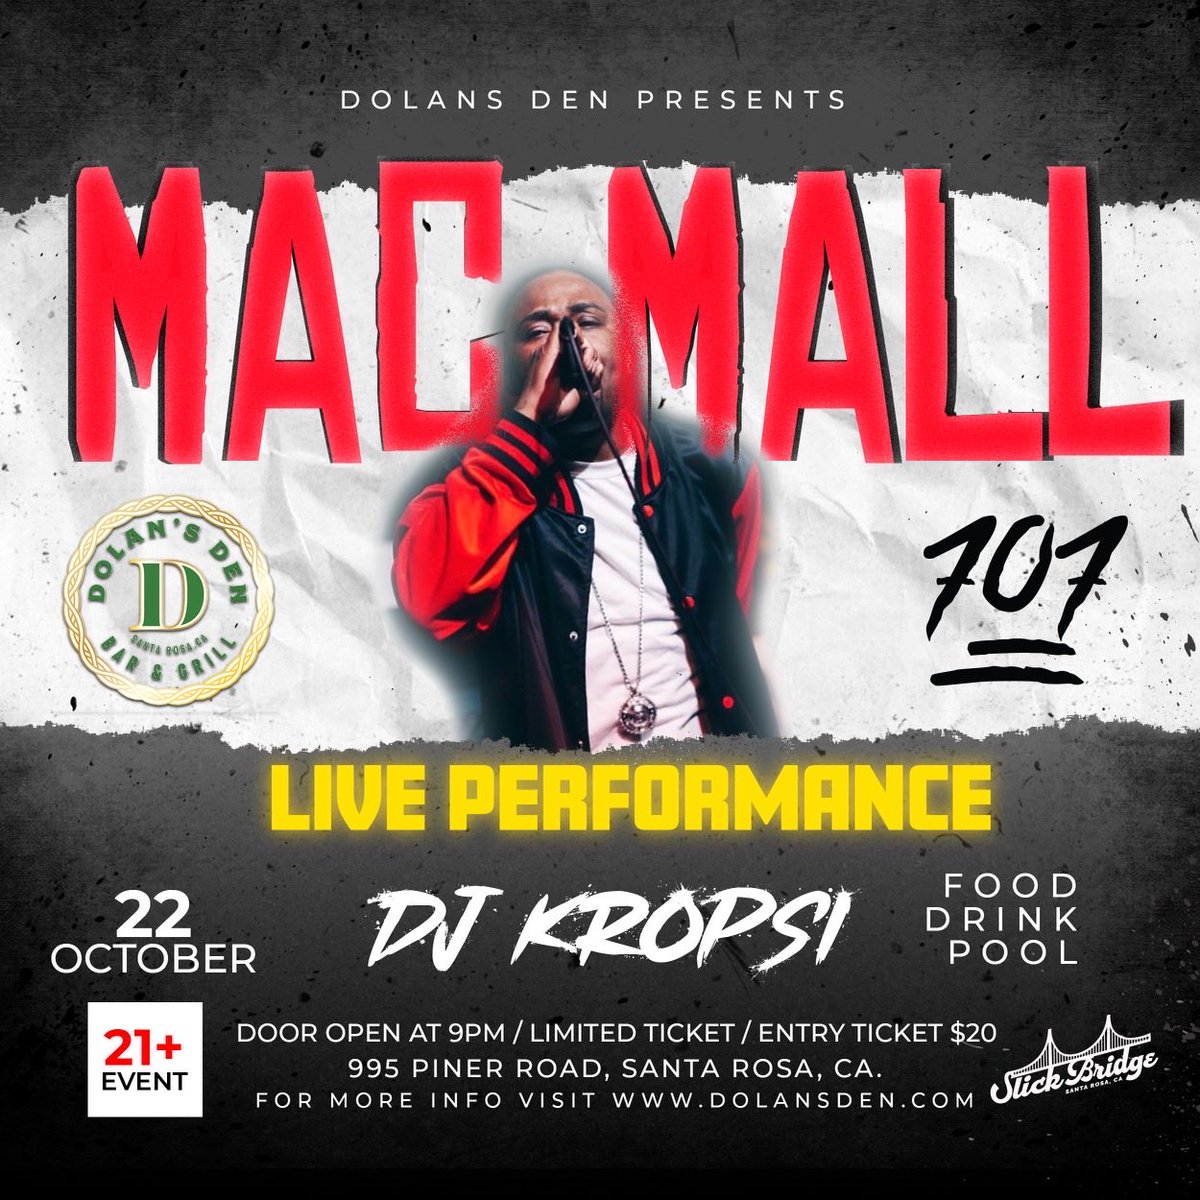 10/22 @therealmacmall performing live @ @dolansden in #SANTAROSA you know how we do pull up its gone be #MACN